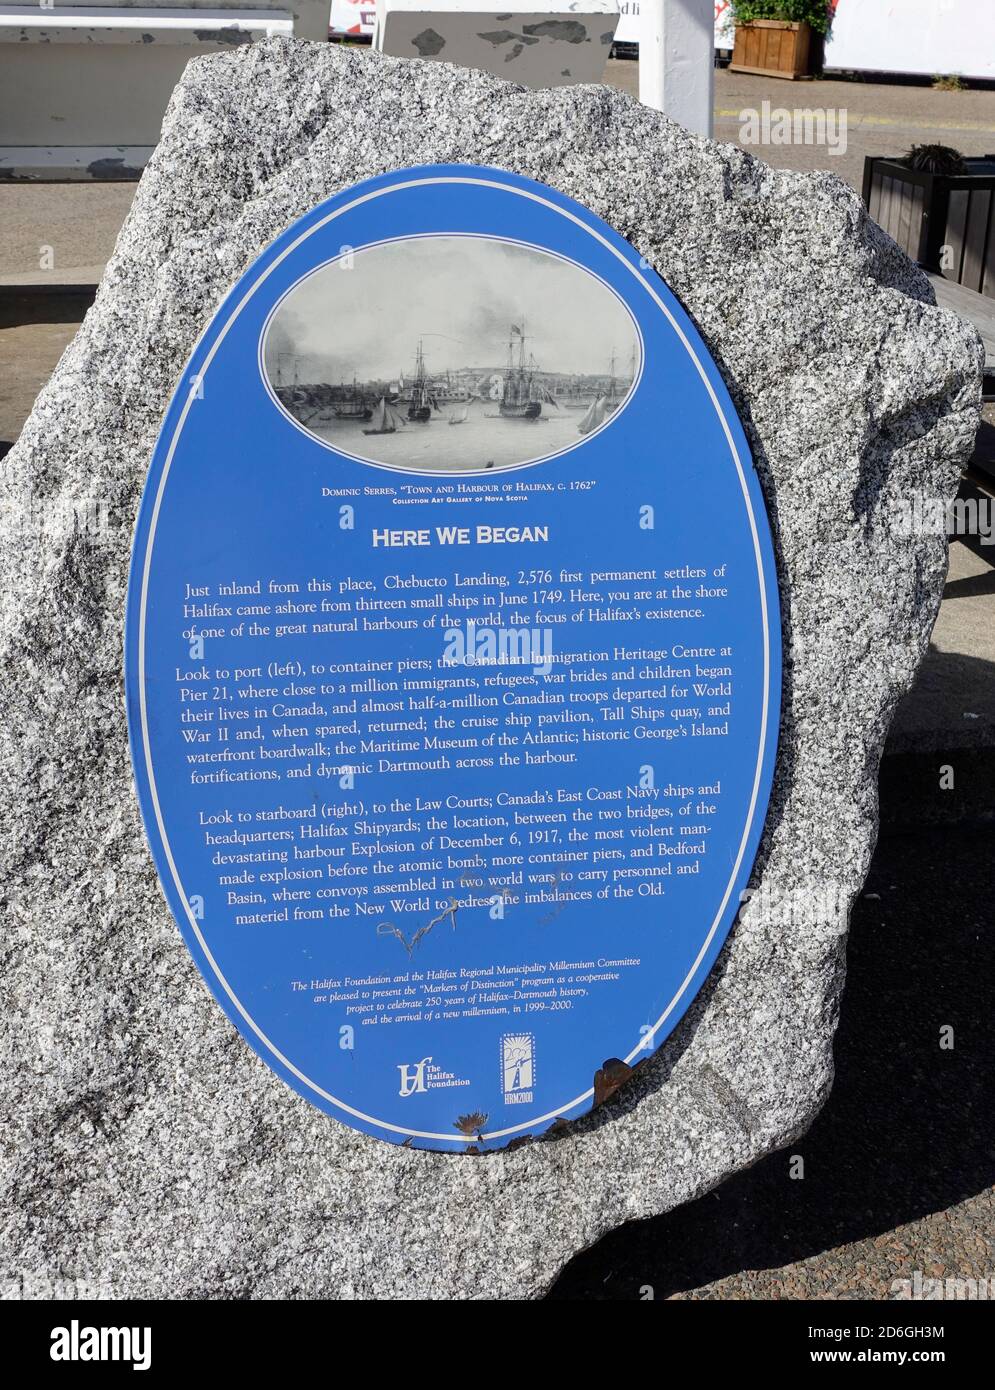 Halifax Nova Scotia Canada Historic Plaque 2576 First Settlers Landed Here In June 1749 The Halifax Foundation Markers of Distinction Celebrate 250 Ye Stock Photo